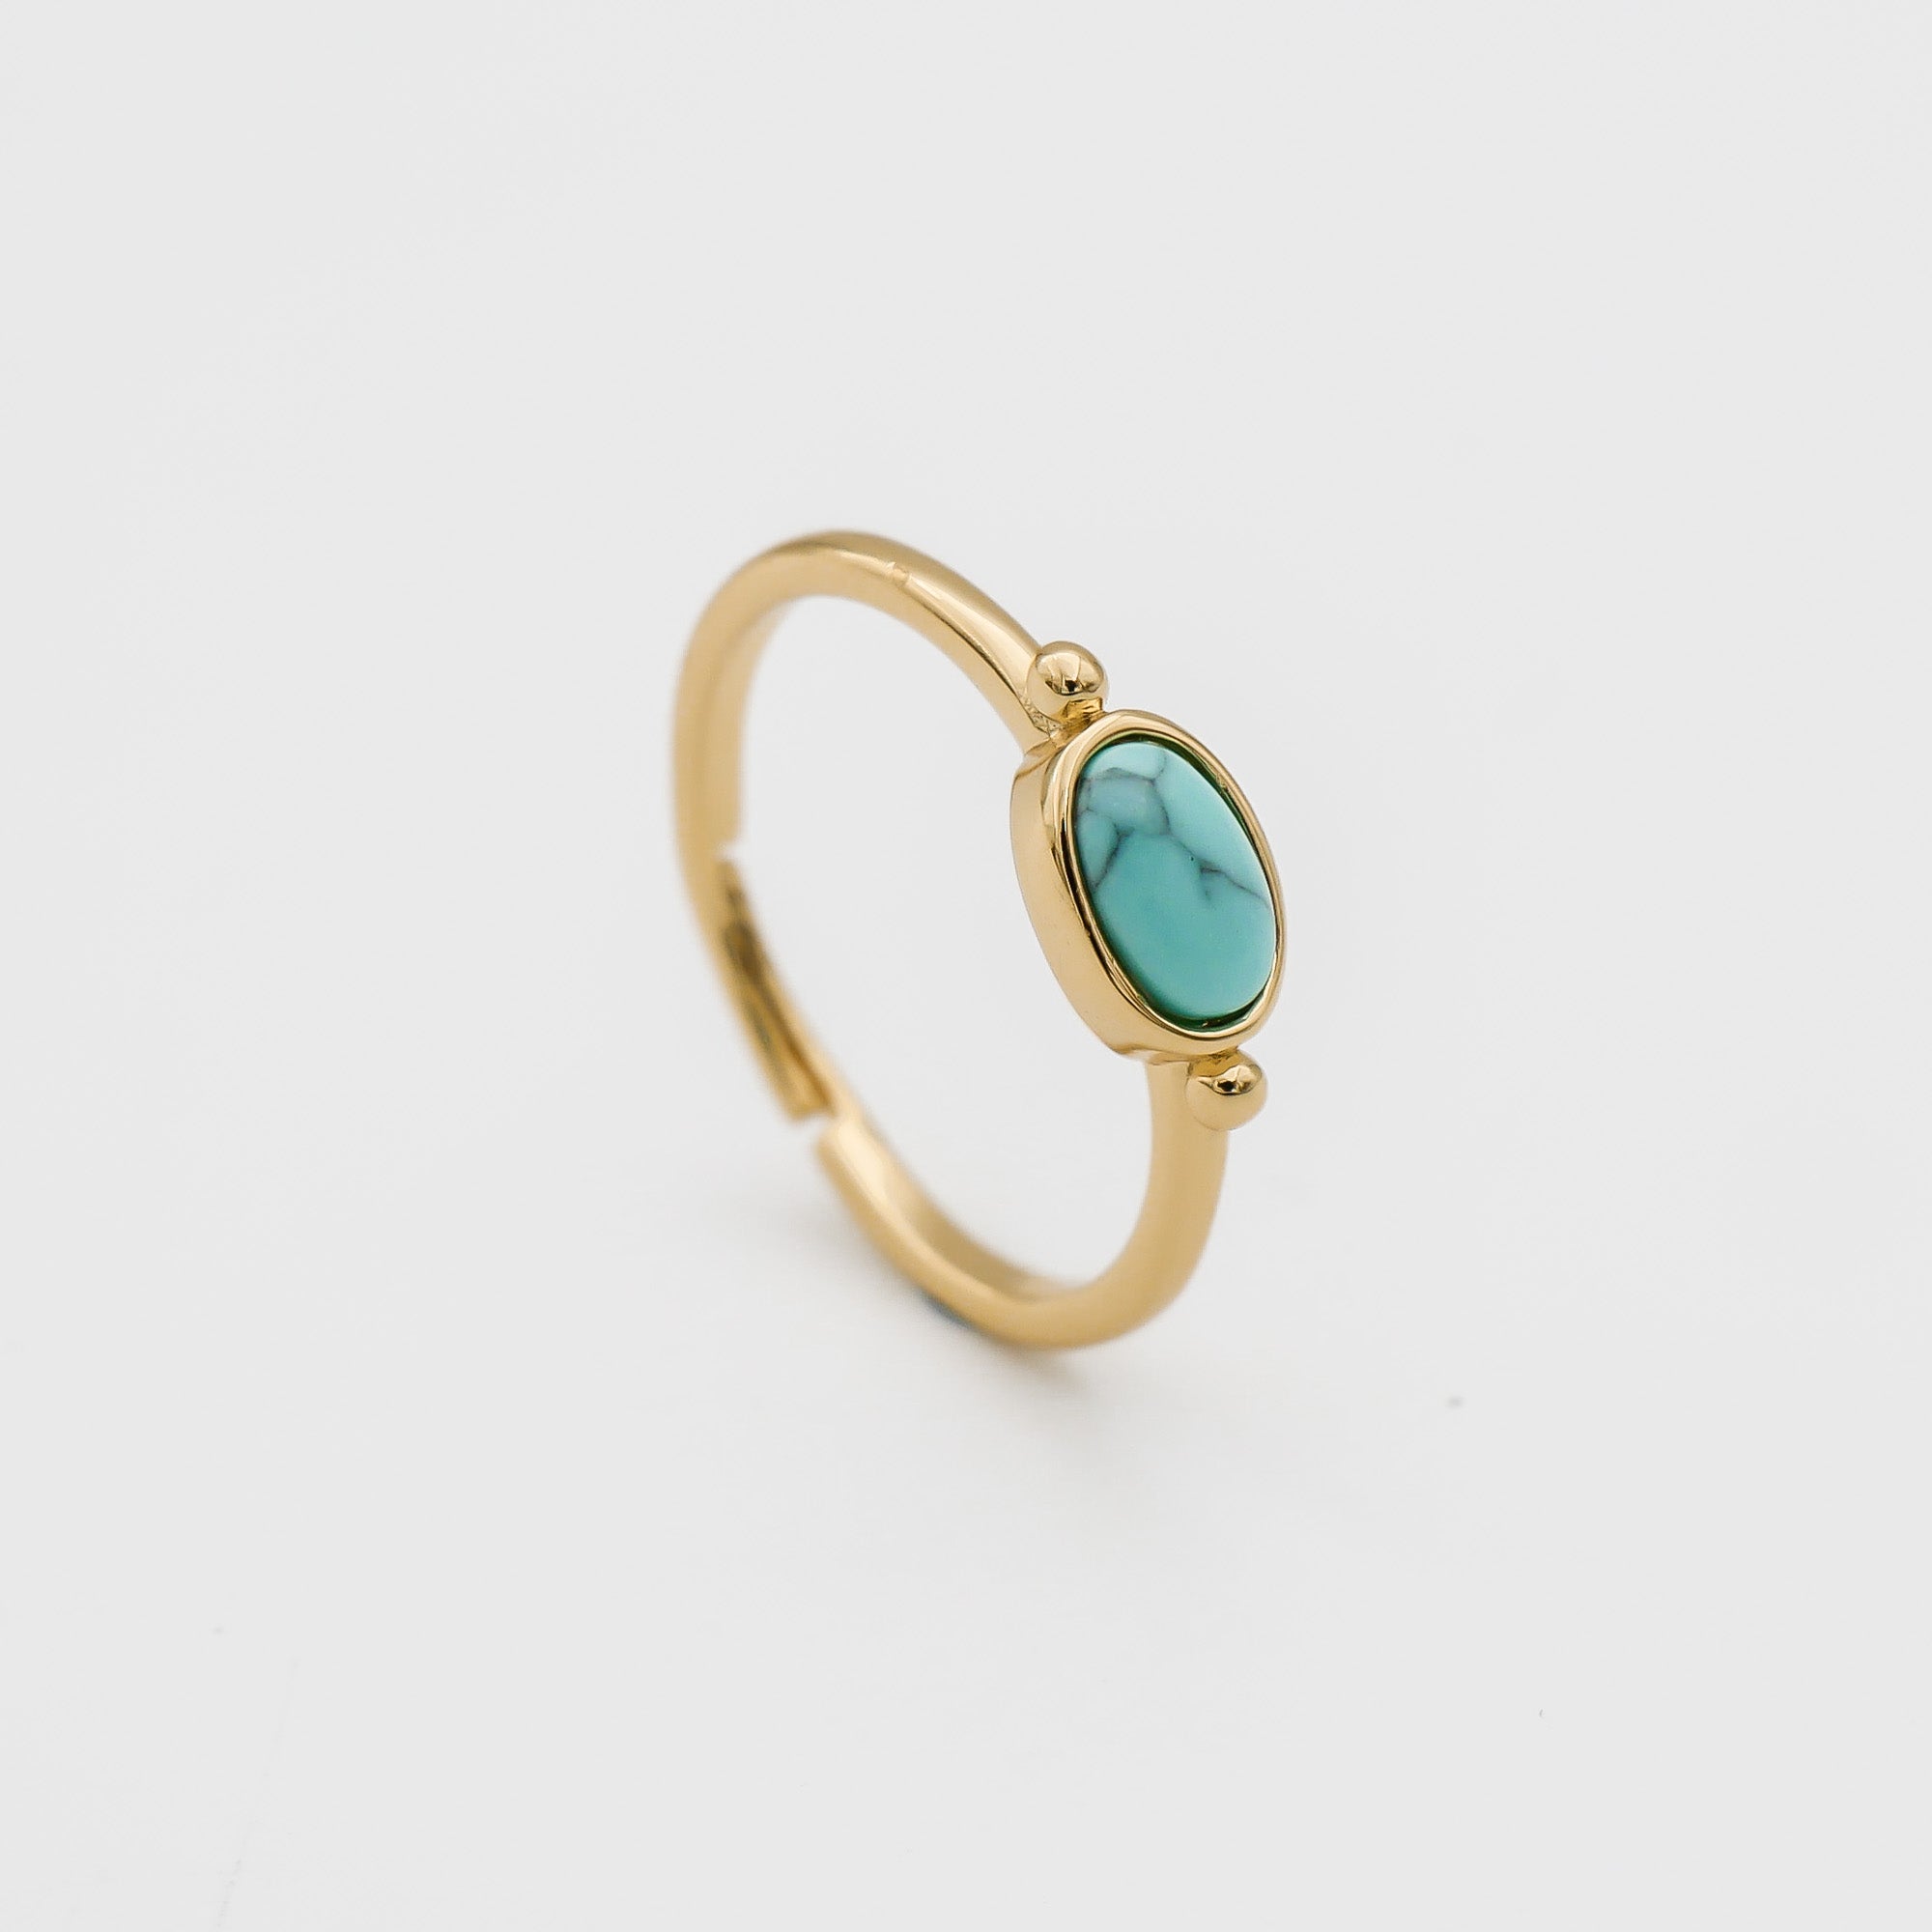 Birthstone ring gold for December with turquoise